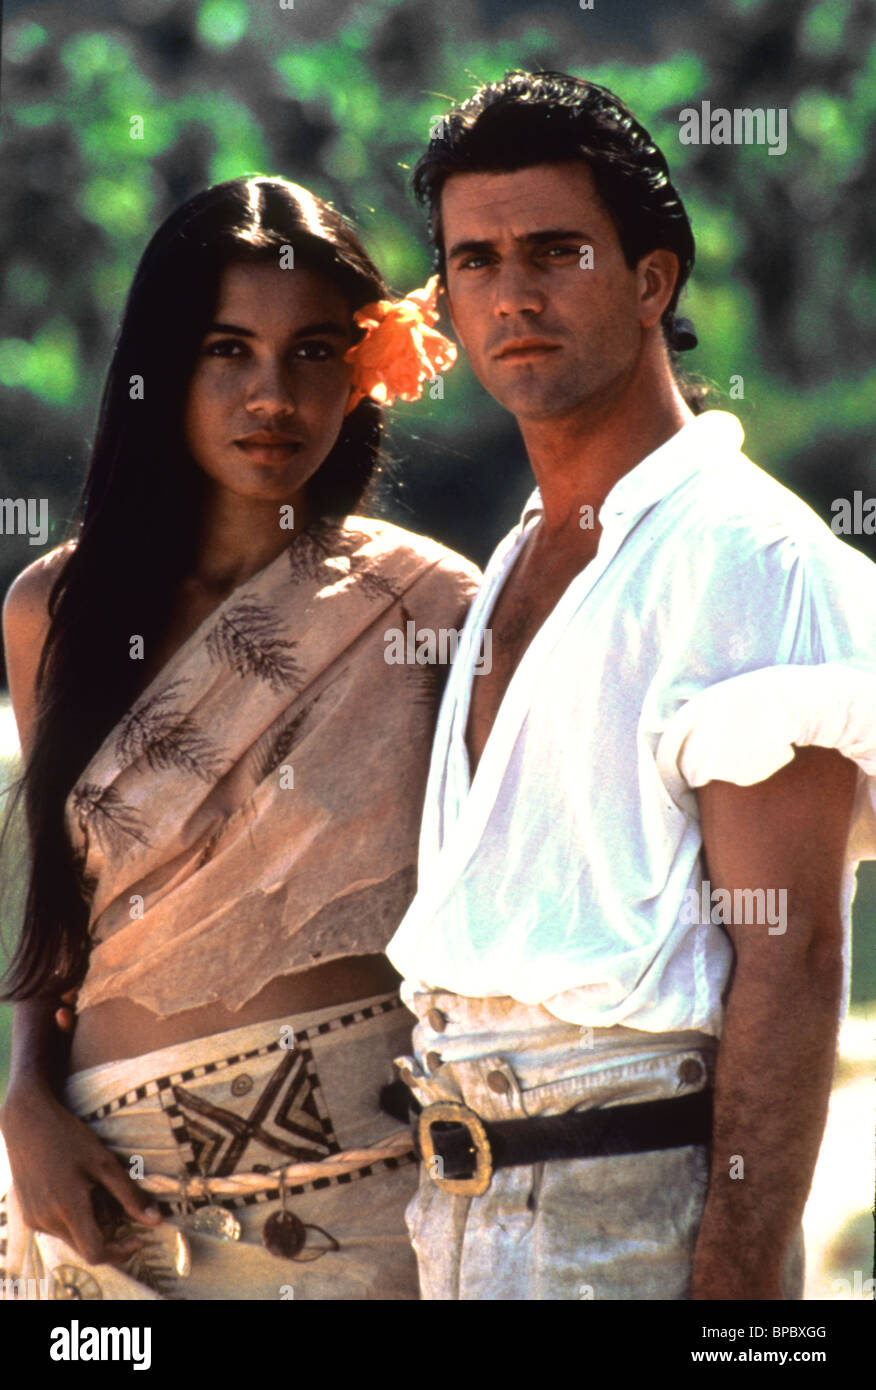 Download this stock image: TEVAITE VERNETTE, MEL GIBSON, THE BOUNTY, 1984